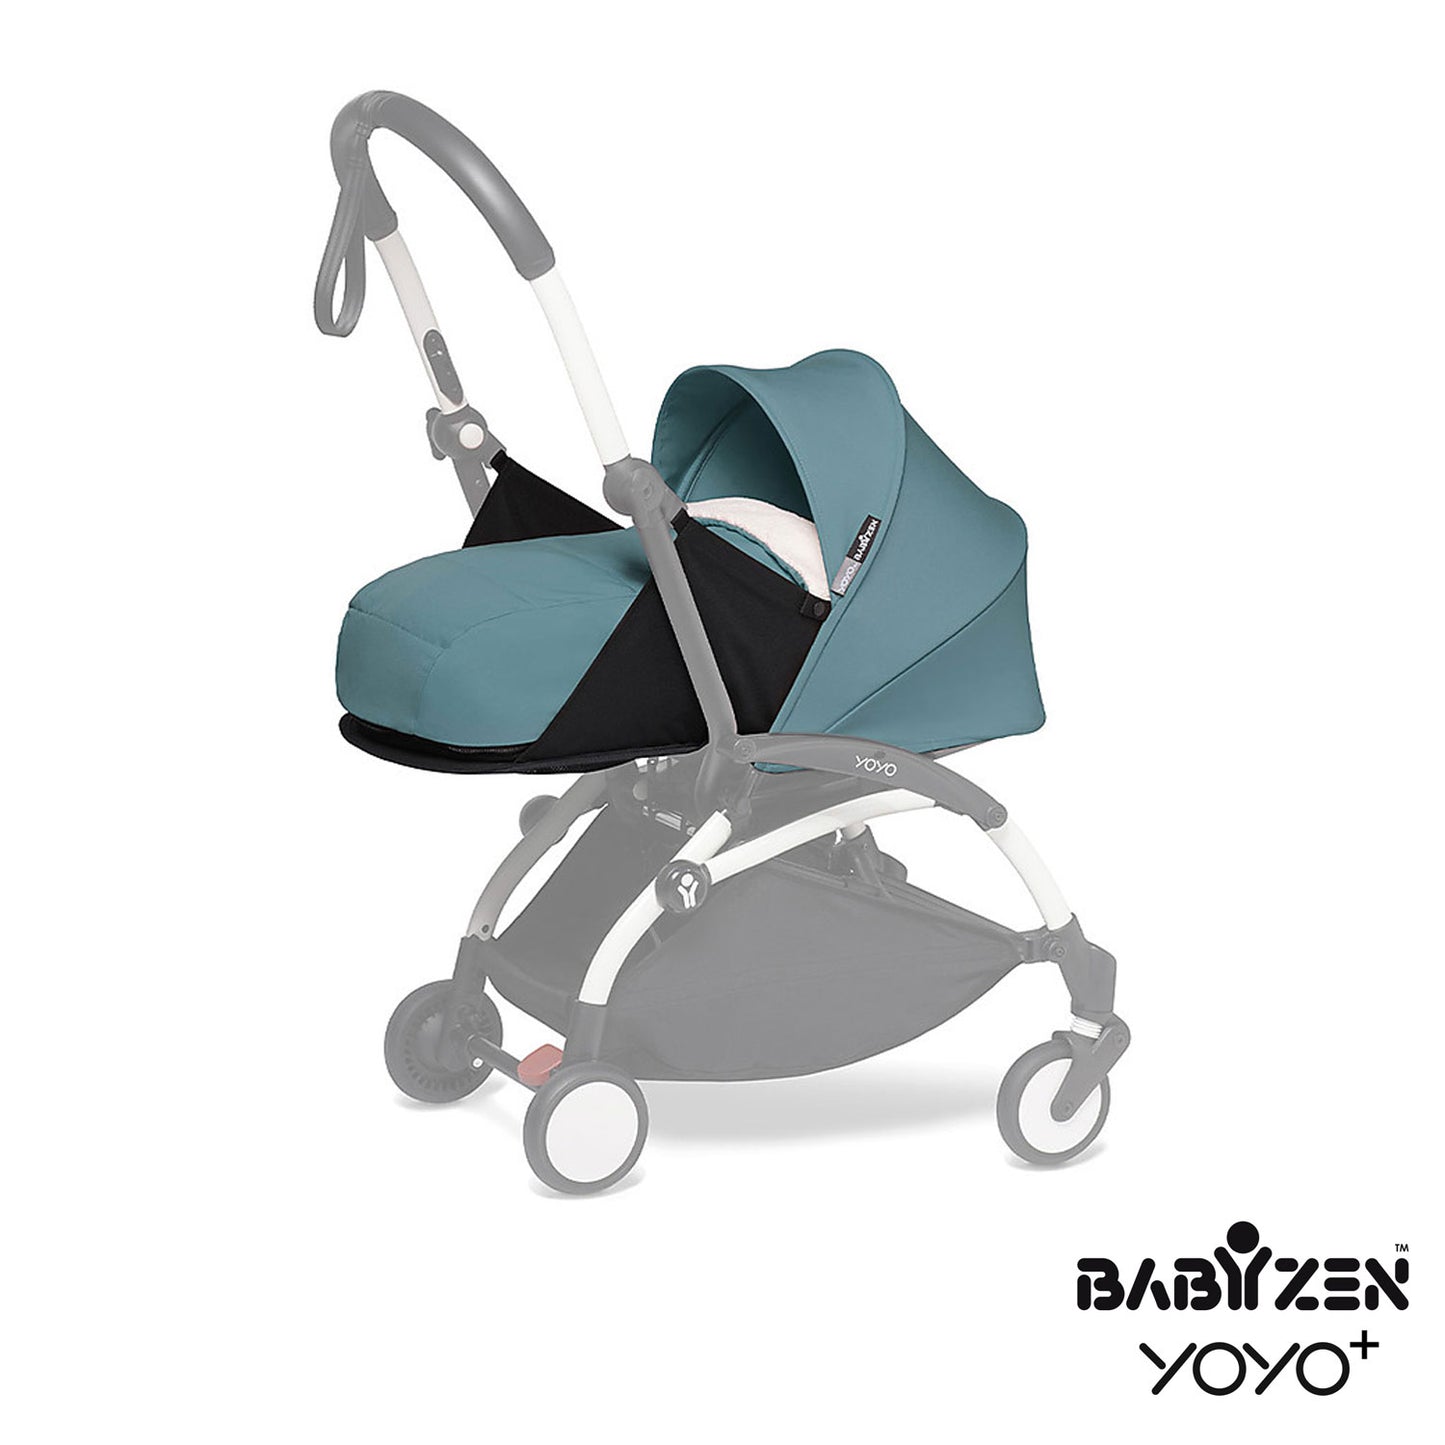 Babyzen - New Cover and hammock for Yoyo 0+ carrycot